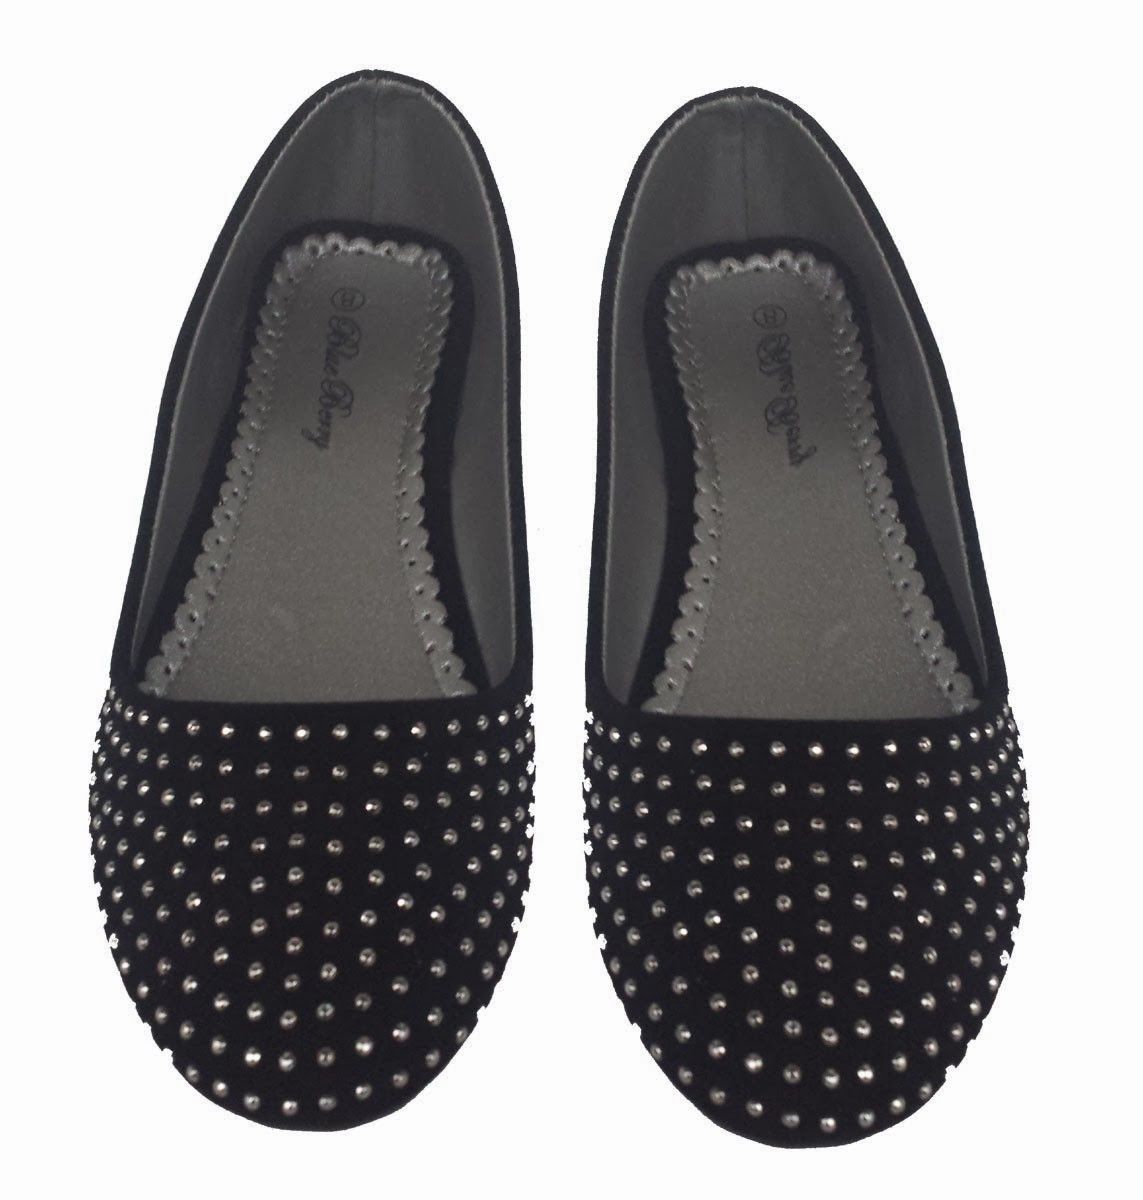 What's New In Flat Shoes For Christmas Special 2014.? title=